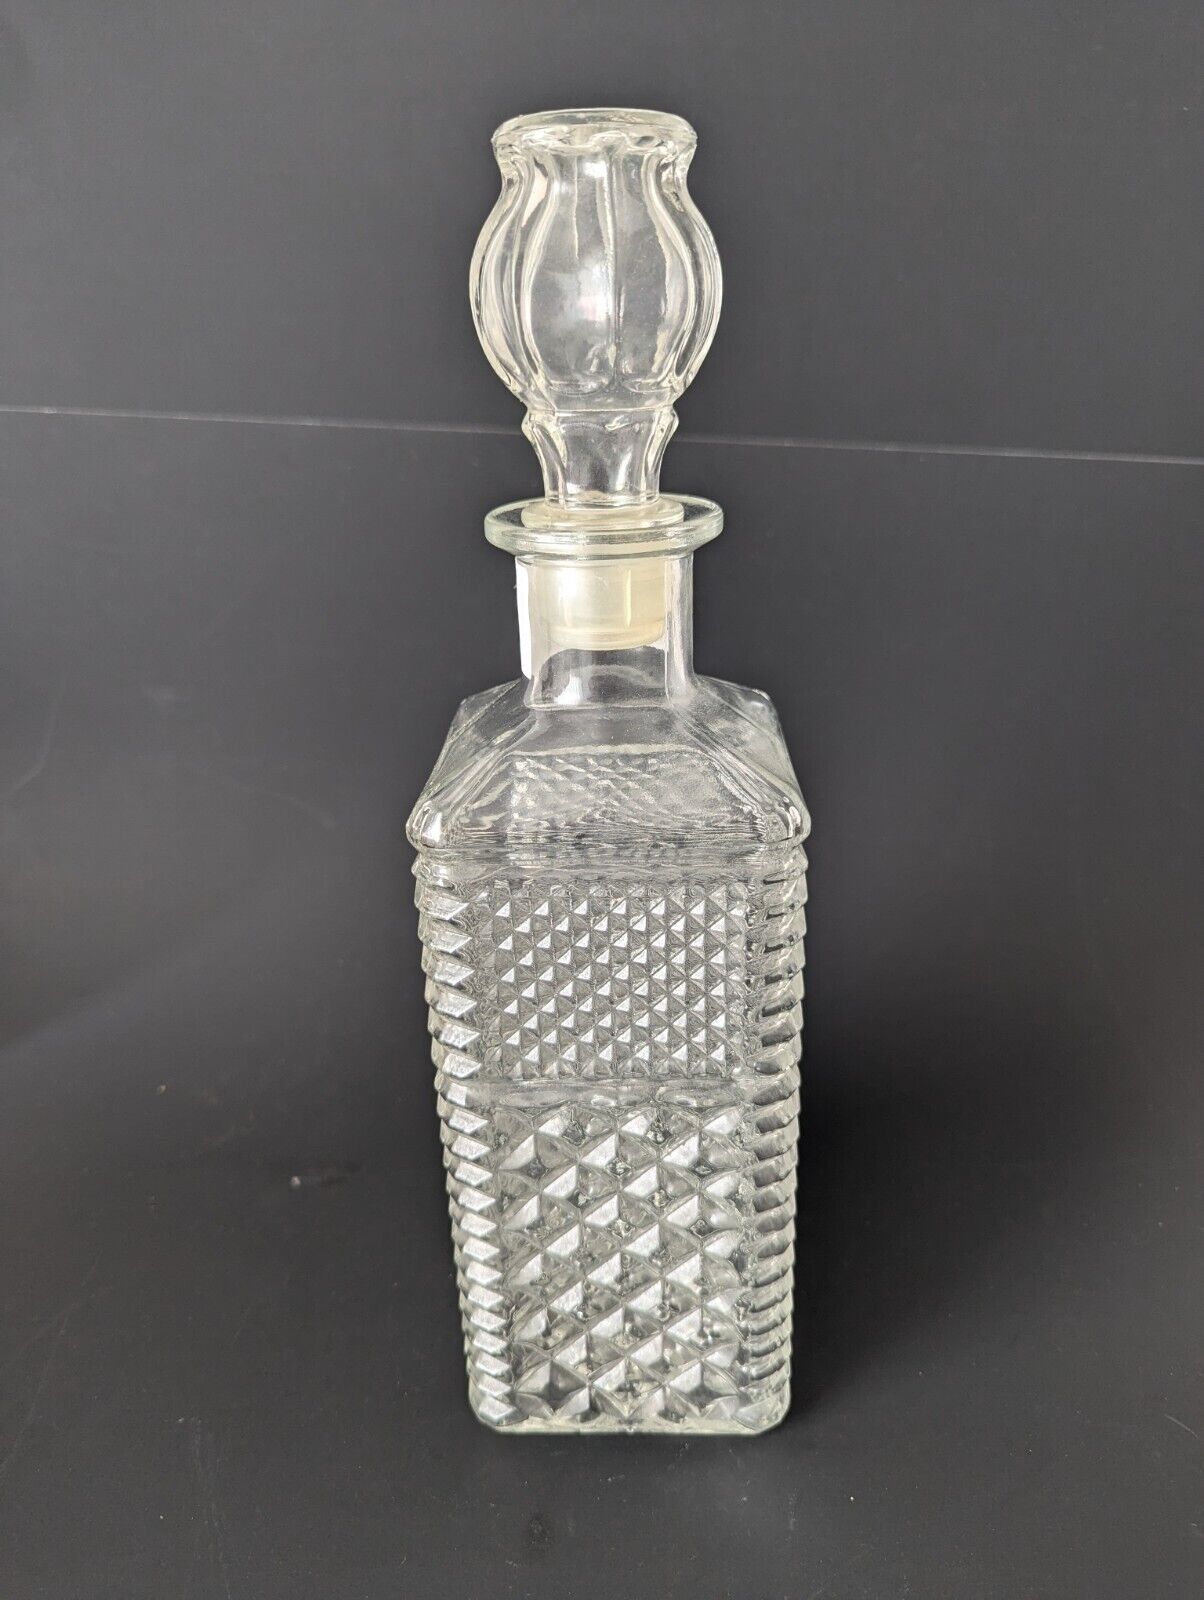 Vintage Crystal Liquor Decanter Diamond Cut Pattern With Top Mancave Bar Whiskey